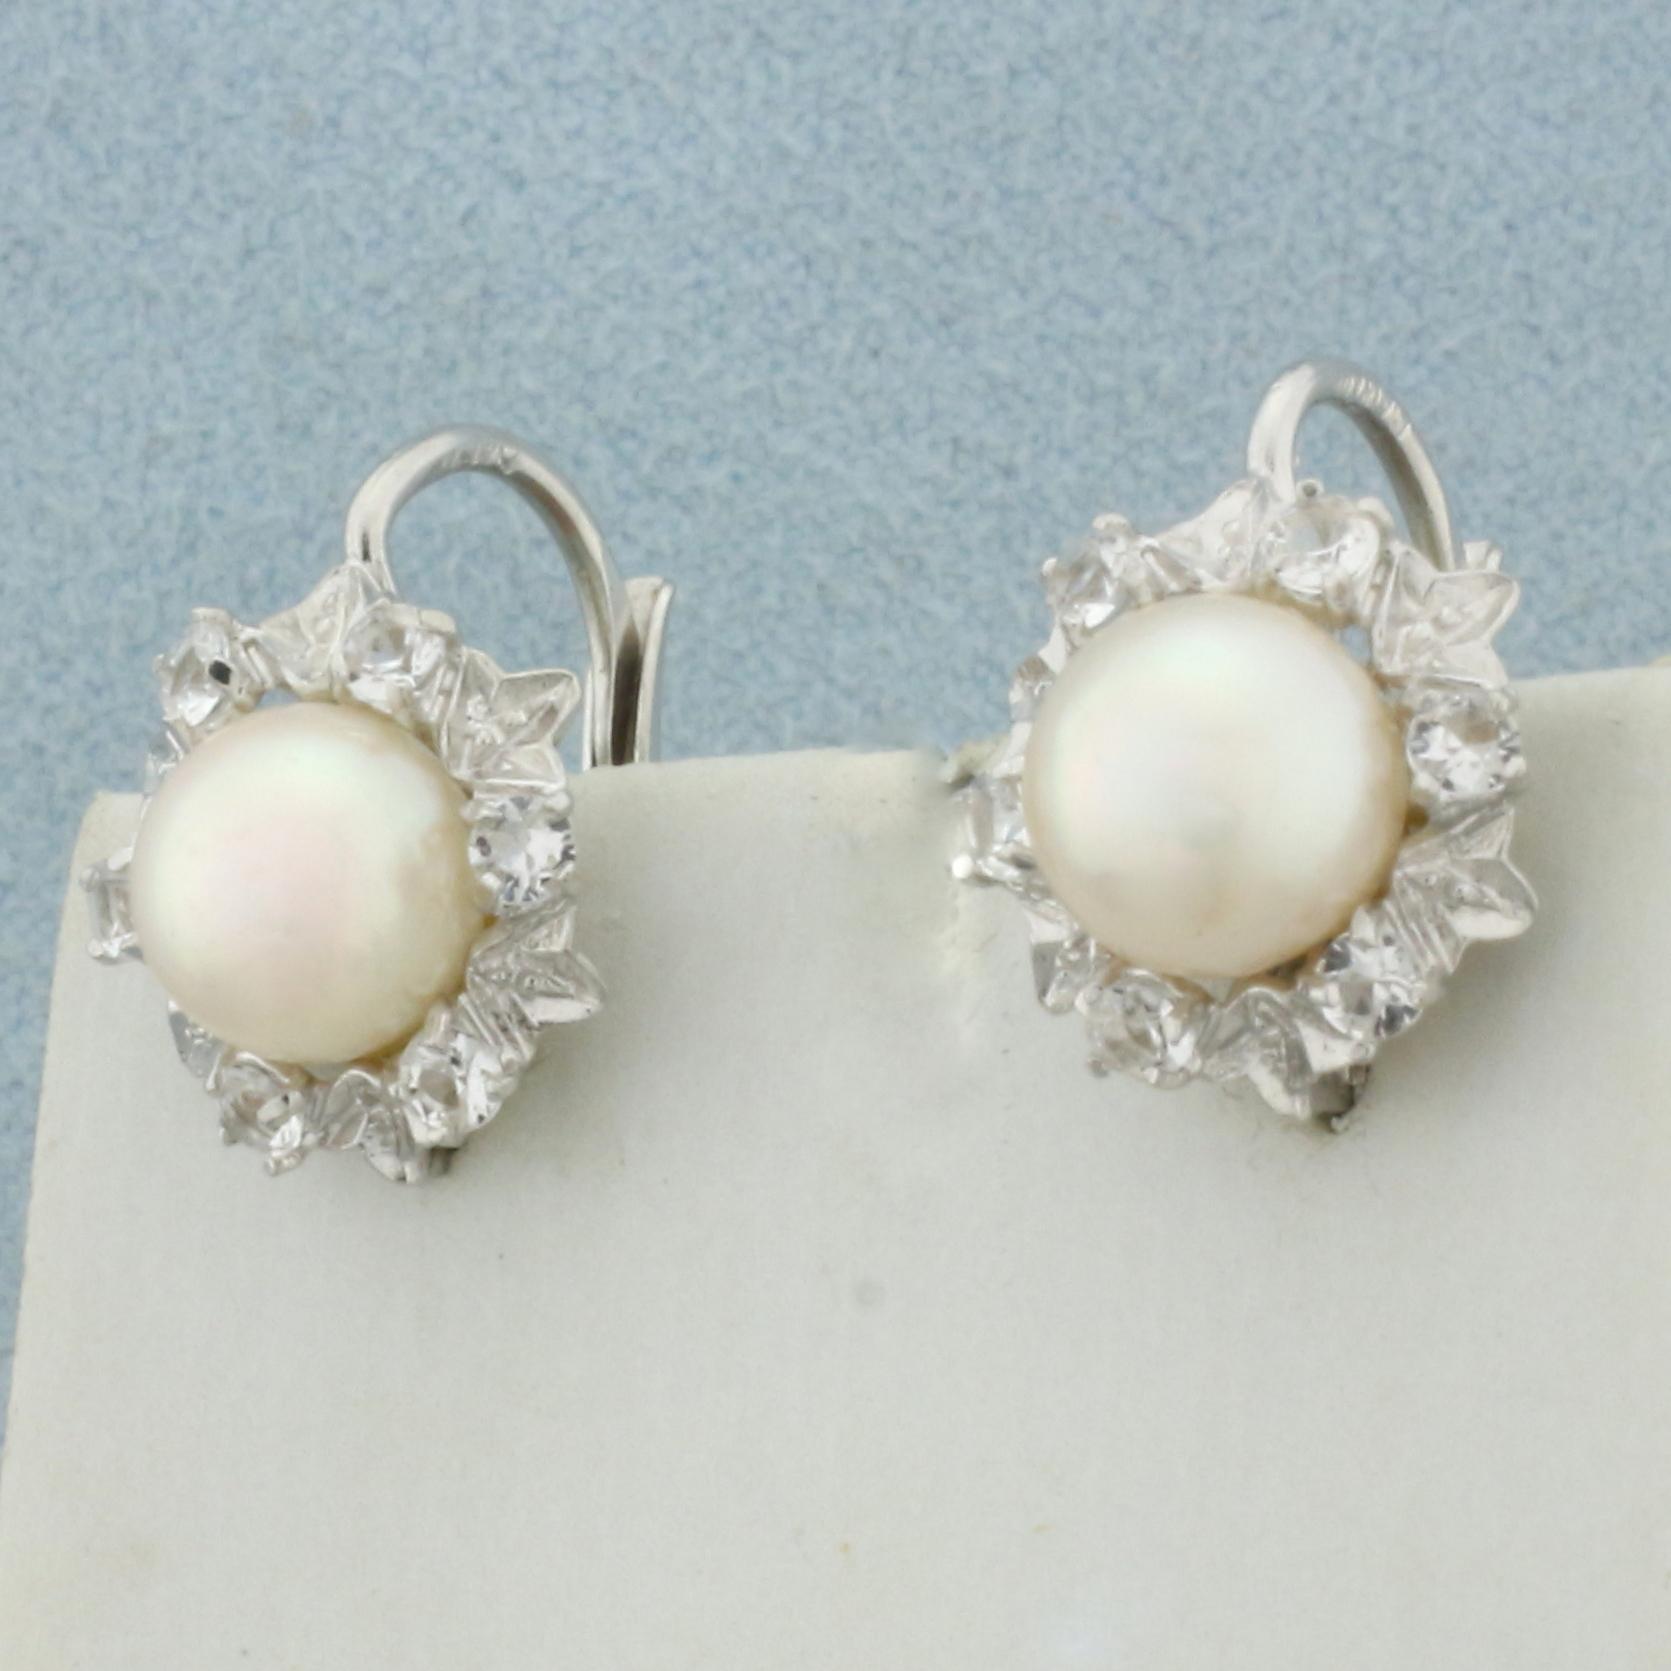 Cultured Pearl And Cz Earrings In 14k White Gold